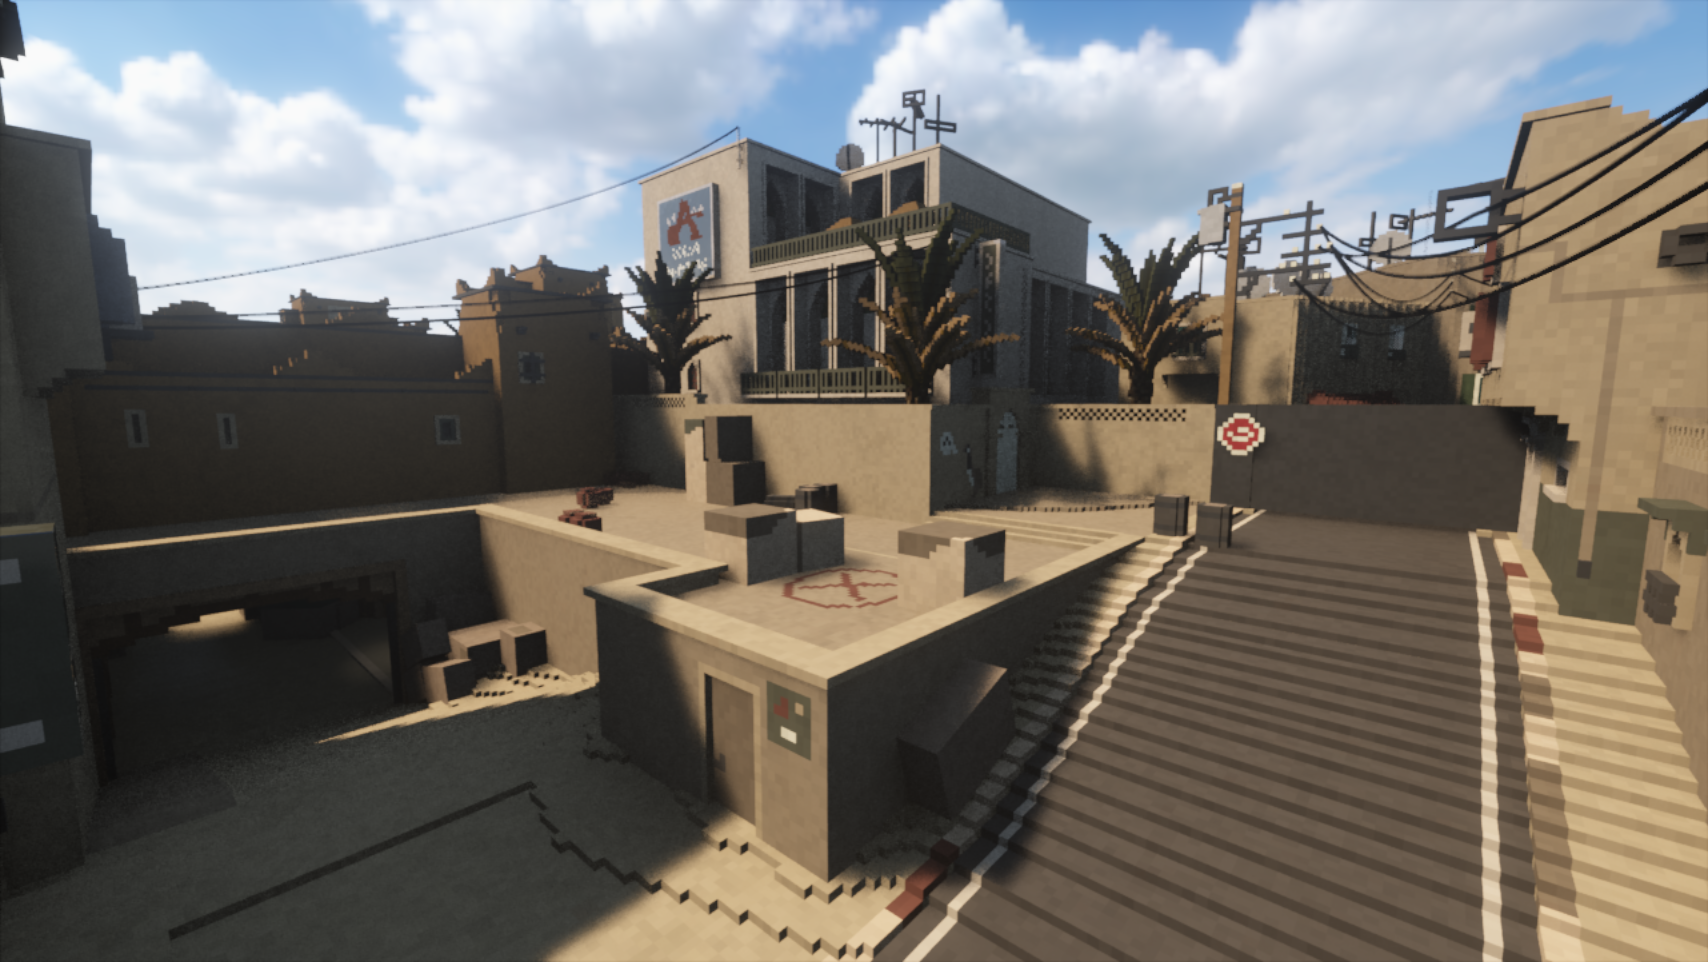 A screenshot of bomb site B from Counter-Strike's de_dust, only recreated in the Teardown engine which makes the entire level destructible.